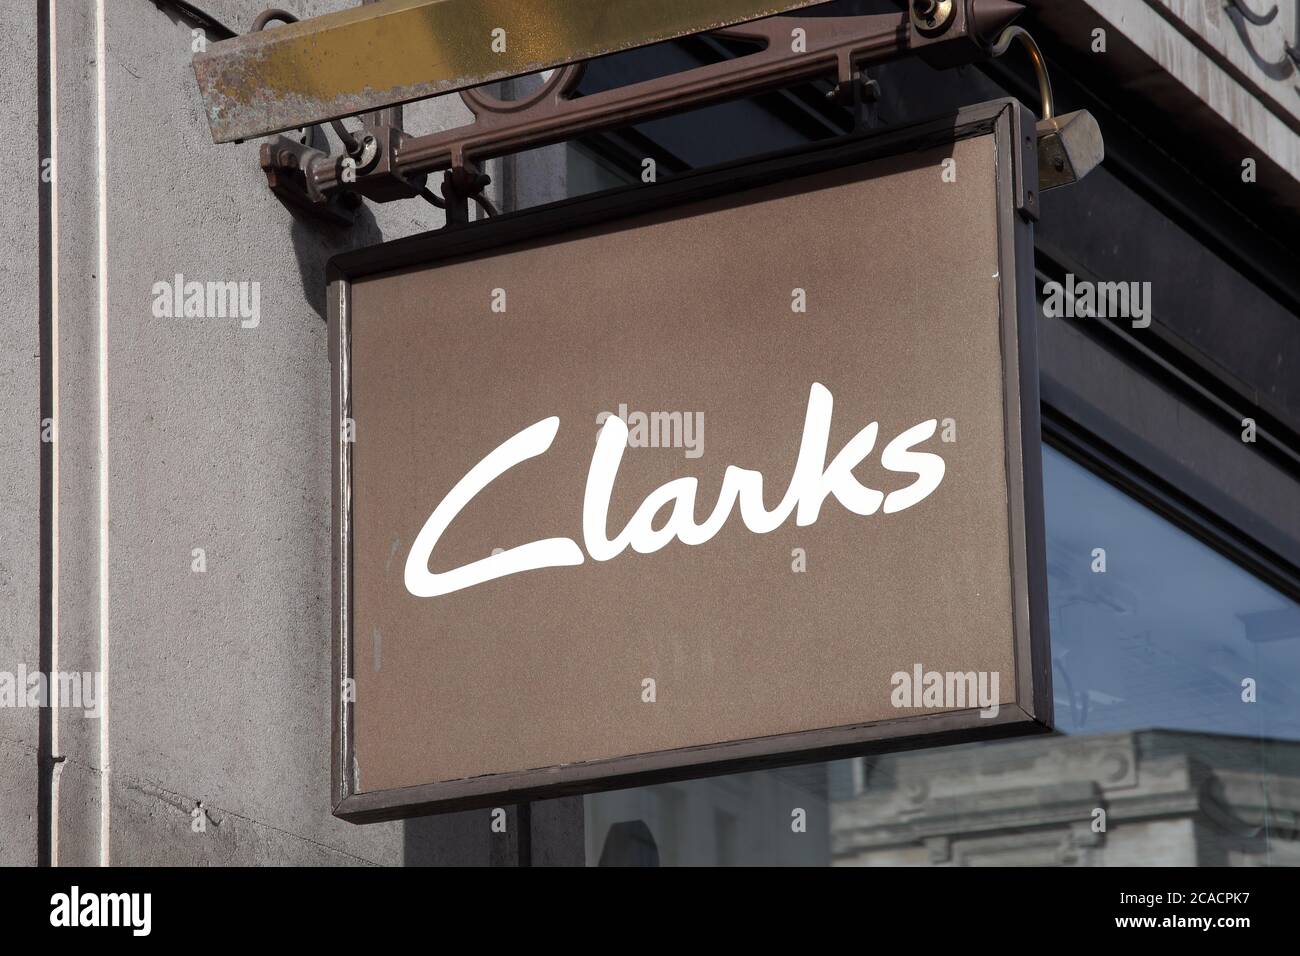 Clarks Logo High Resolution Stock Photography and Images - Alamy